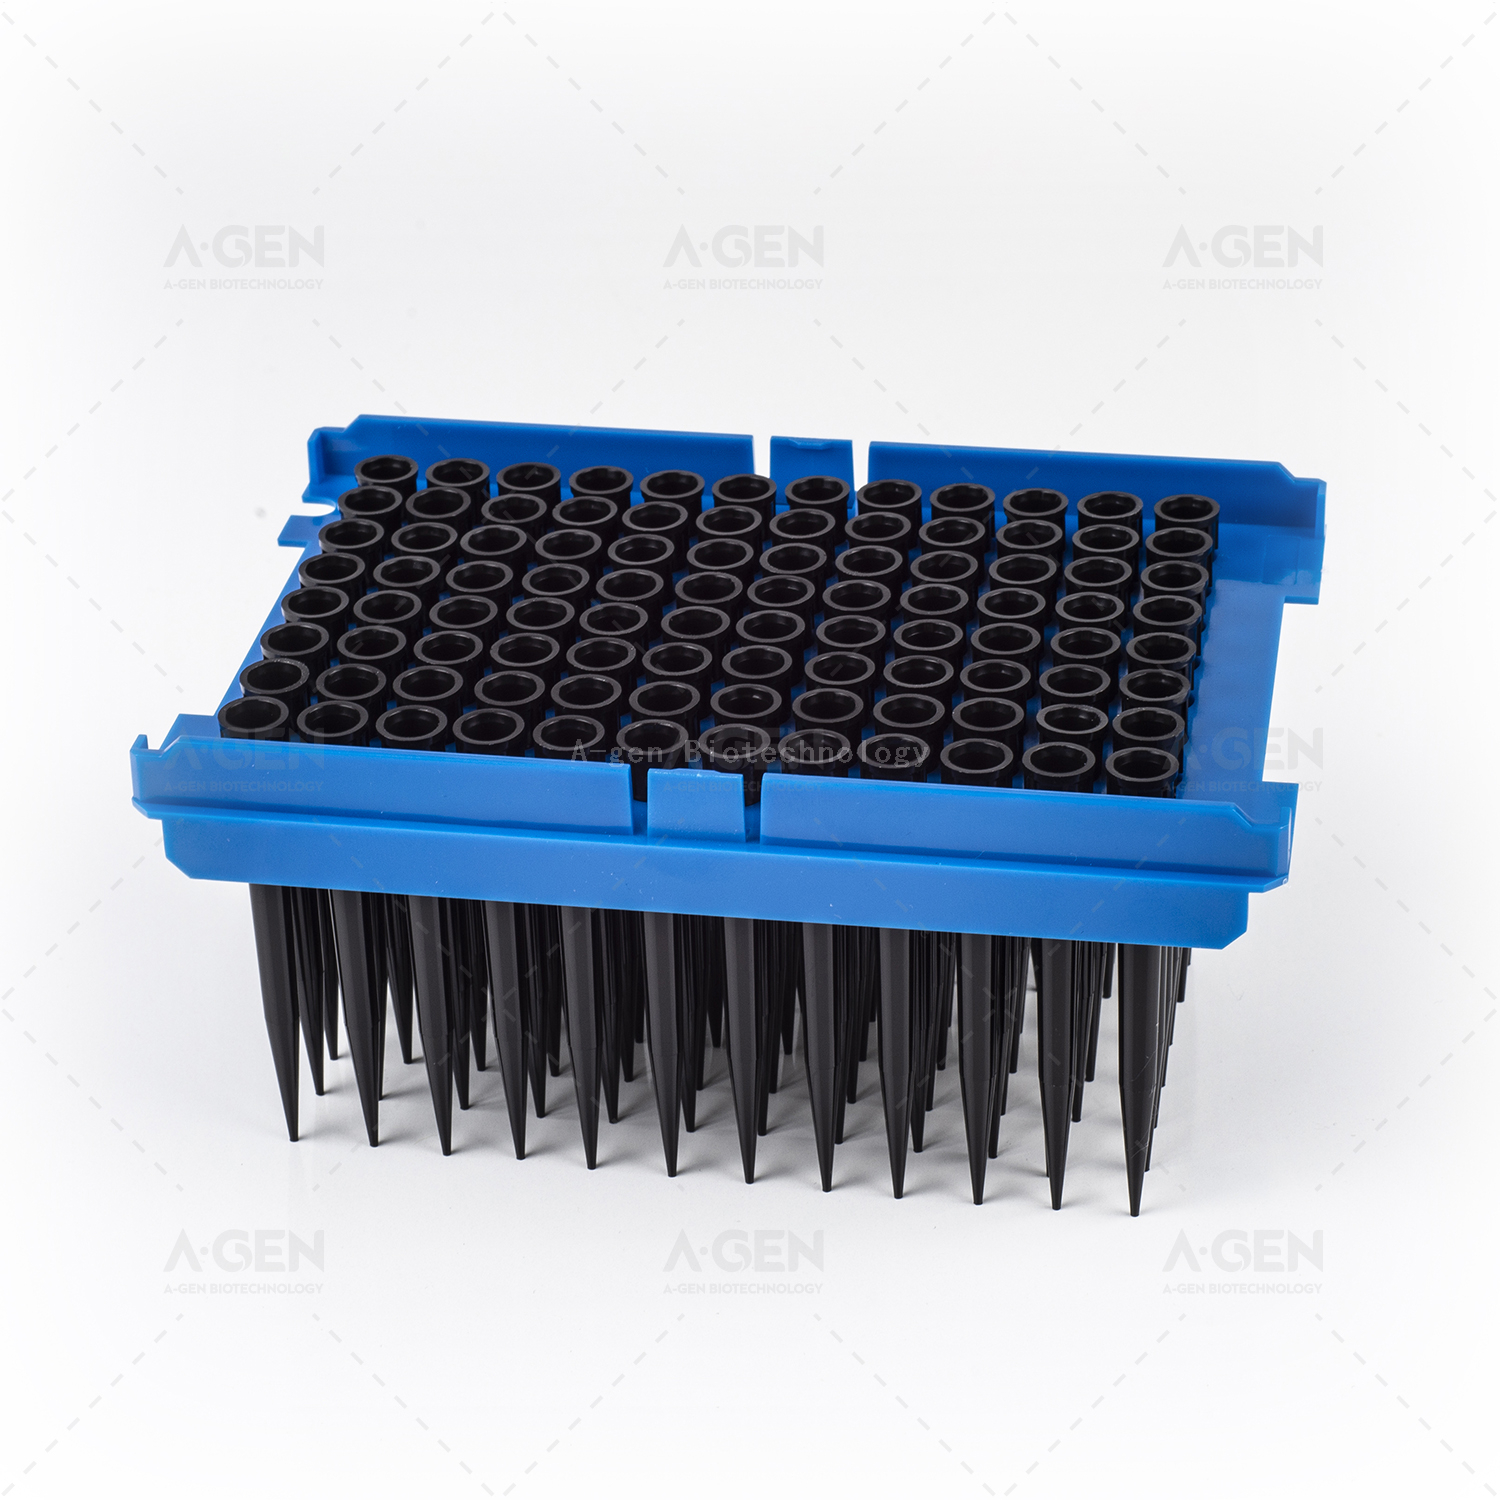 Tecan LiHa Conductive 200μL PP Pipette Tip (Racked,sterilized) for Liquid Transfer With Filter TTF-200C-RS DNAse/RNAse Free 